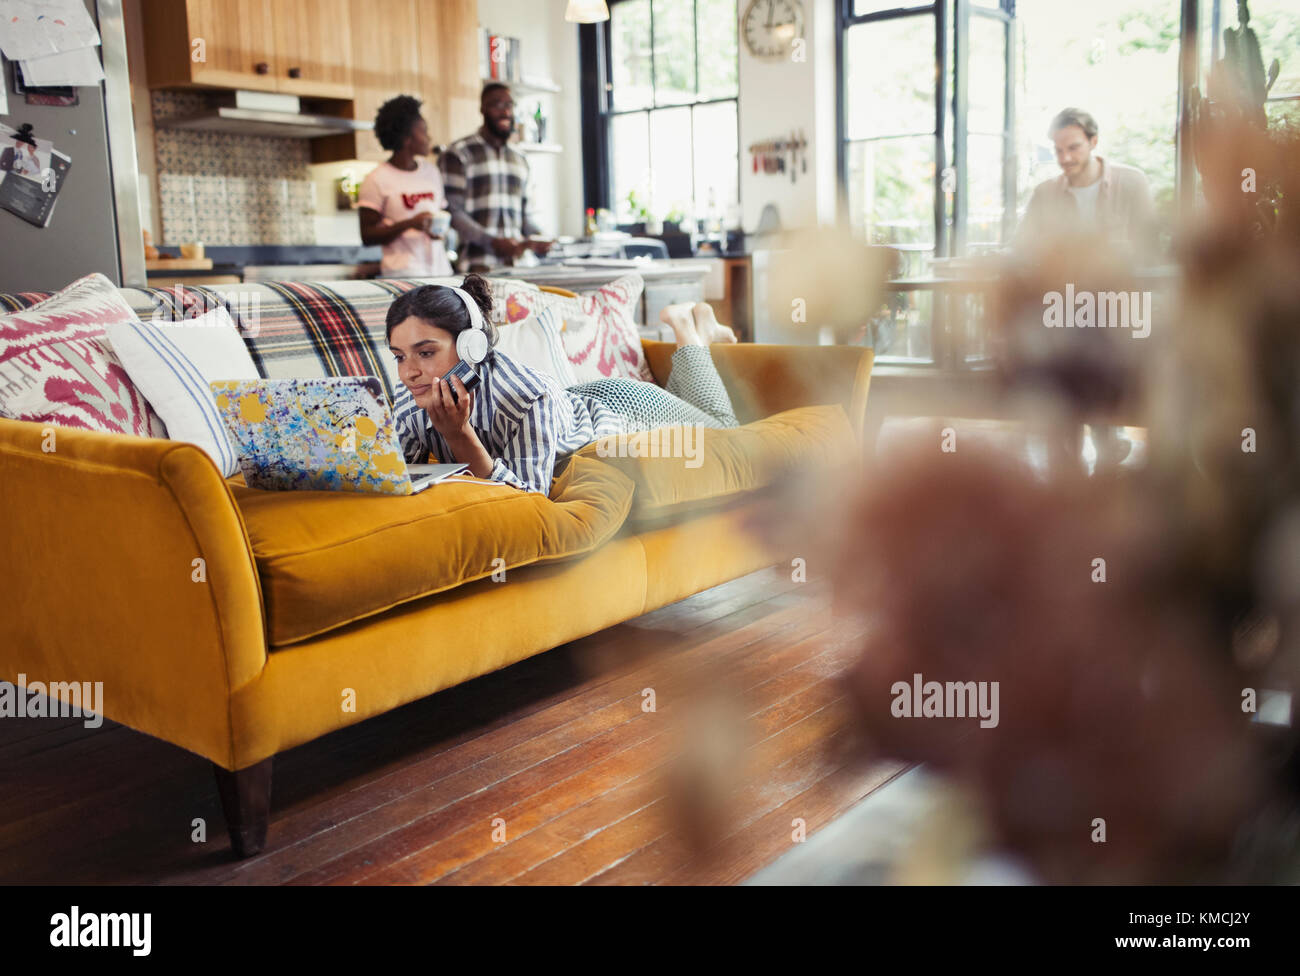 Young woman with headphones using laptop on living room sofa Stock Photo